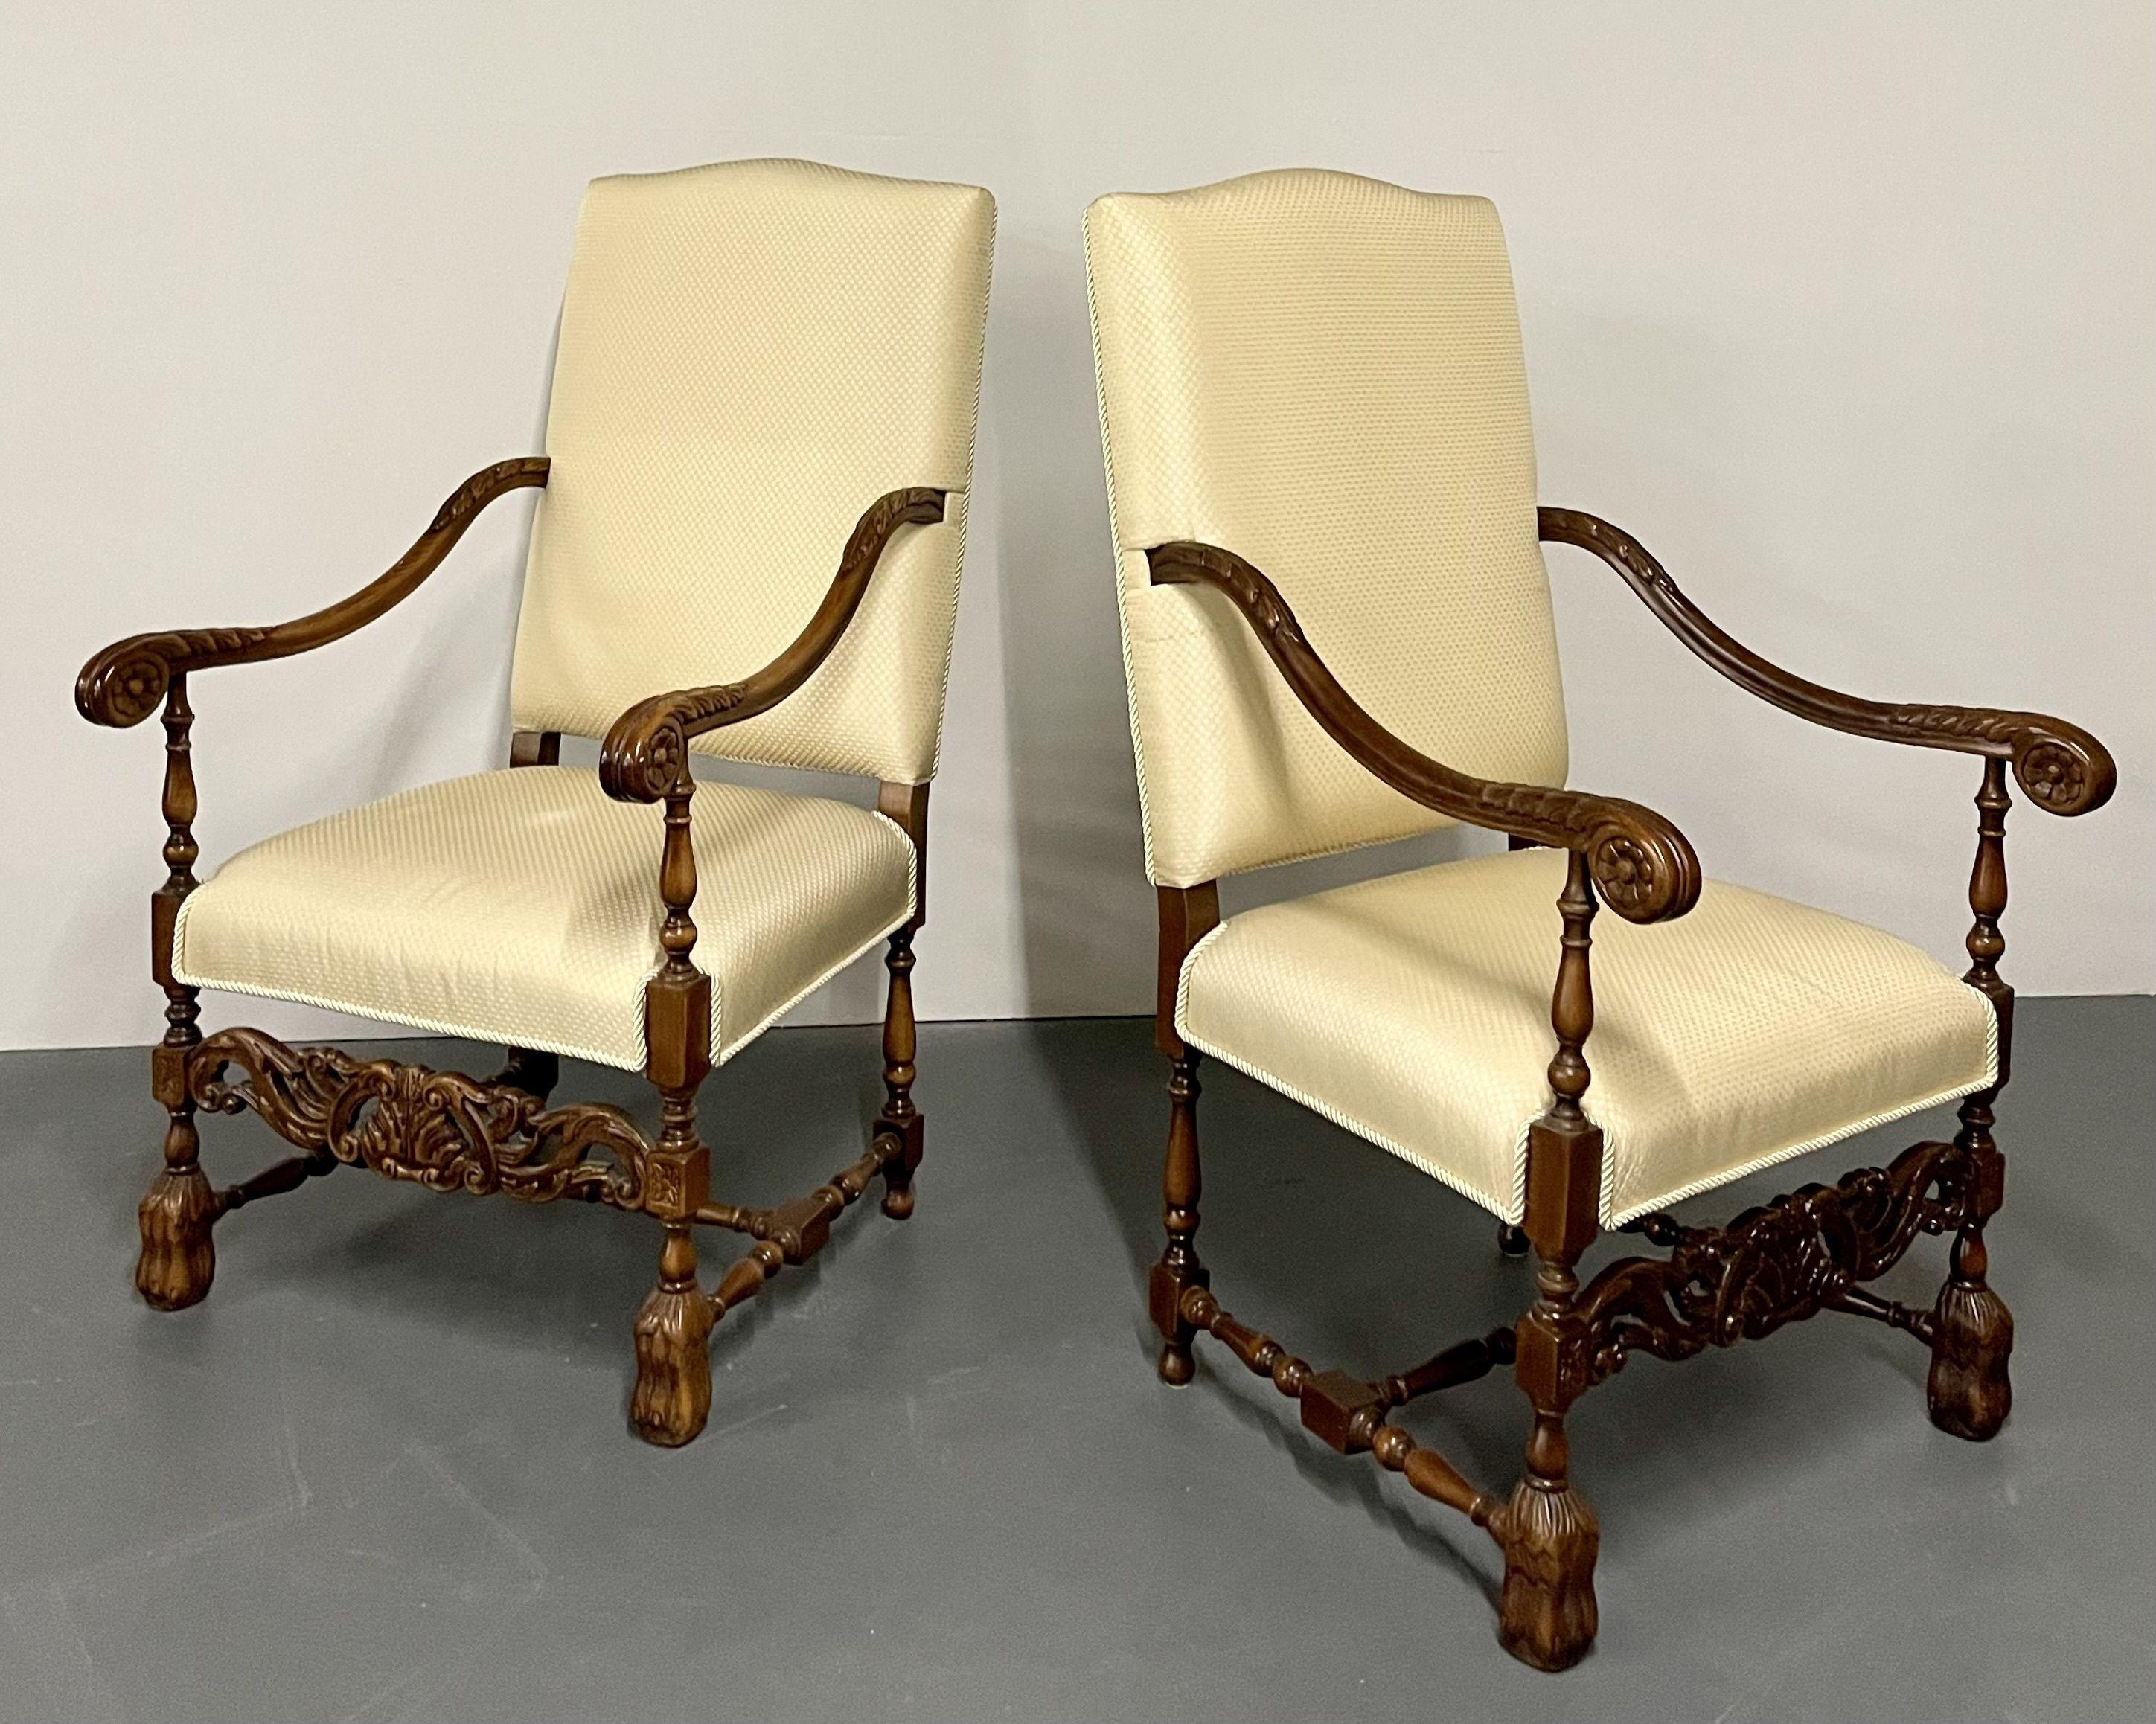 Pair of Custom Throne, Hi Back chairs. Each in a Scalamandre fine Upholstery supported by Jacobean Style Barley Twist Walnut legs with a stretcher. The pair with wonderfully carved arms and front leg support.

Seat height: 19in.

Removed